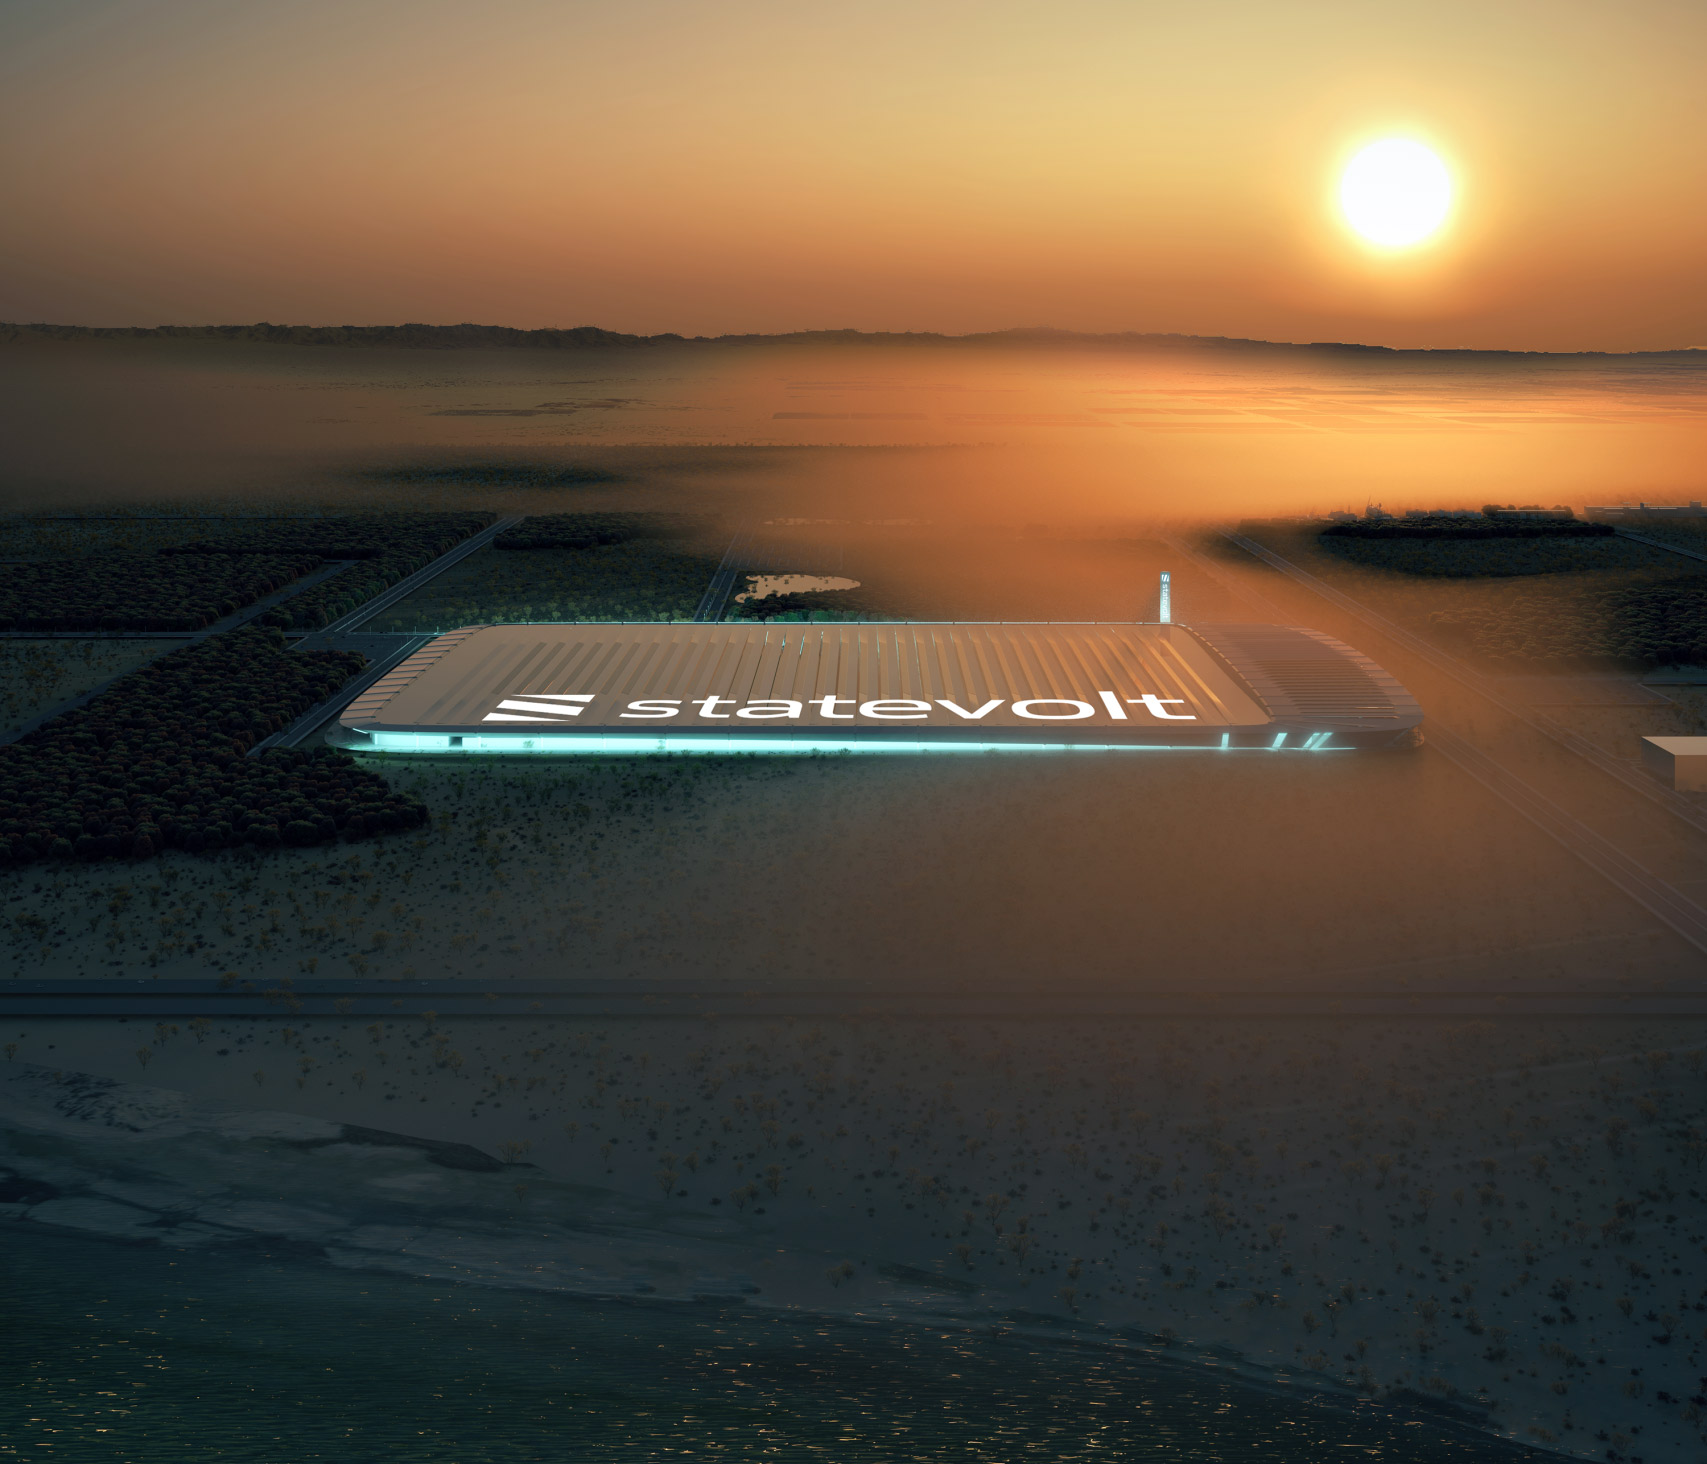 Statevolt logo on the ground in front of a dramatic sunset landscape